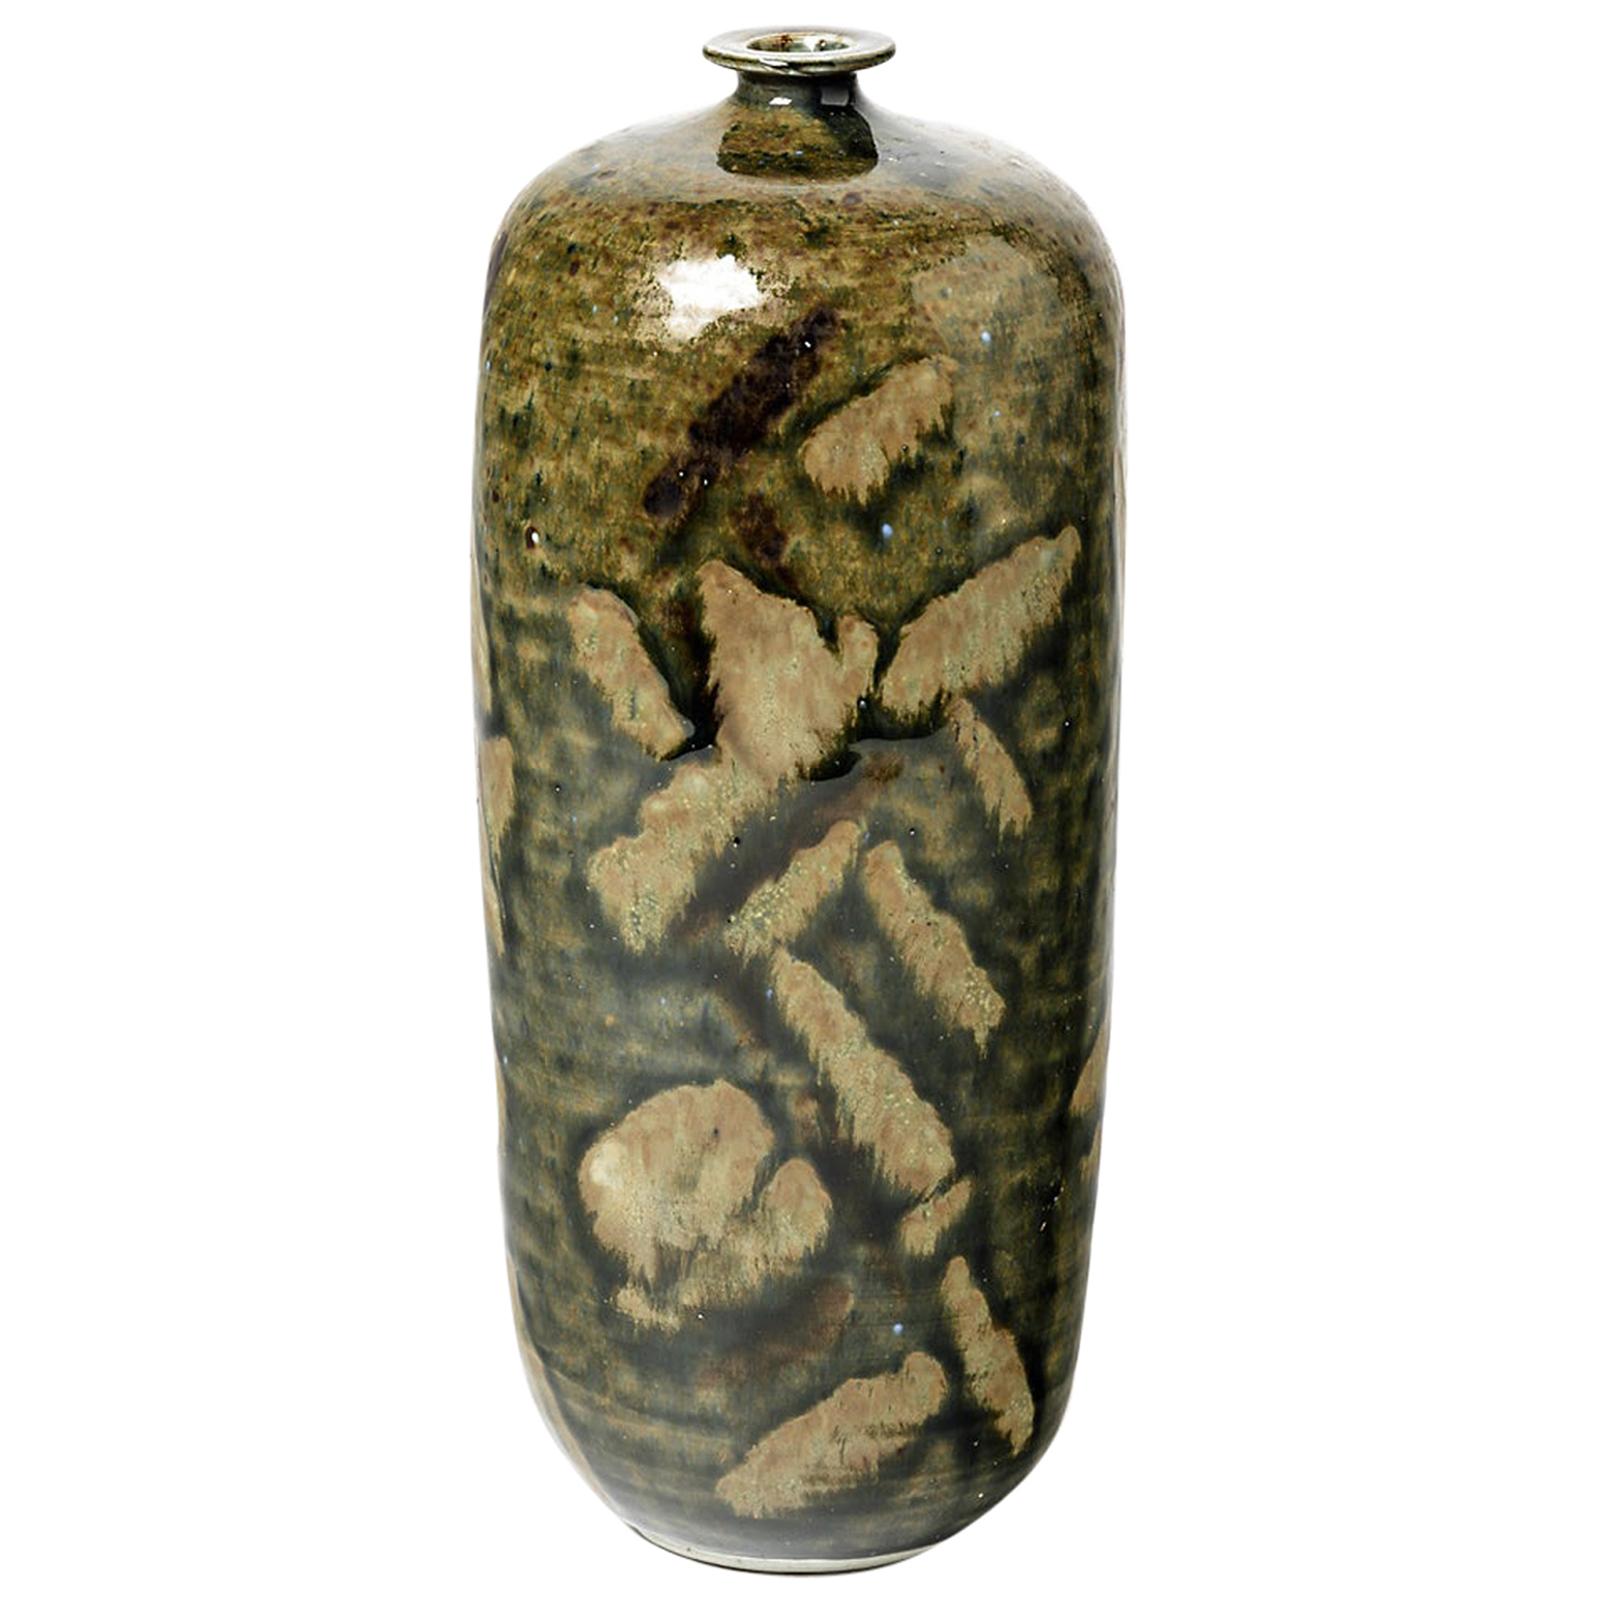 Abstract Porcelain Brown and Green Ceramic Bottle by Héraud La Borne circa 1970 For Sale